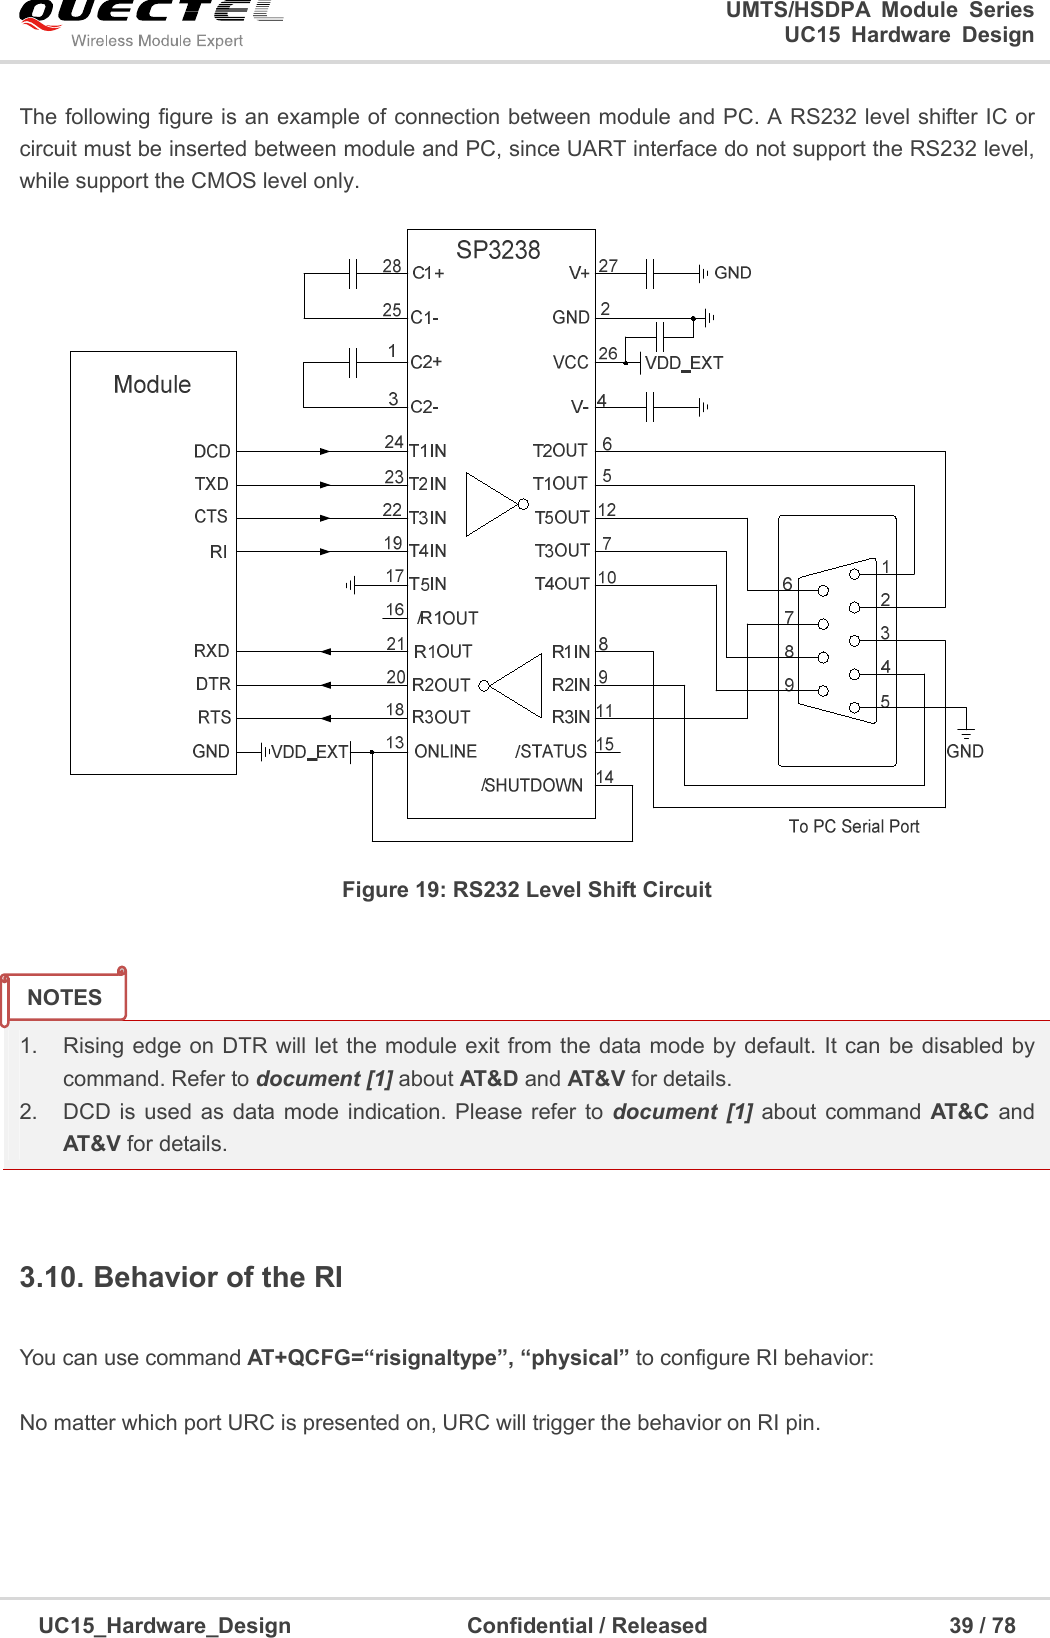                                                                        UMTS/HSDPA  Module  Series                                                                 UC15 Hardware Design  UC15_Hardware_Design                                Confidential / Released                                            39 / 78    The following figure is an example of connection between module and PC. A RS232 level shifter IC or circuit must be inserted between module and PC, since UART interface do not support the RS232 level, while support the CMOS level only.    Figure 19: RS232 Level Shift Circuit     1.  Rising edge on DTR will let  the module exit from  the  data mode by default. It can  be disabled by command. Refer to document [1] about AT&amp;D and AT&amp;V for details. 2.  DCD  is  used  as  data mode  indication. Please  refer to  document  [1] about  command  AT&amp;C and AT&amp;V for details.  3.10. Behavior of the RI  You can use command AT+QCFG=“risignaltype”, “physical” to configure RI behavior:  No matter which port URC is presented on, URC will trigger the behavior on RI pin.    NOTES 